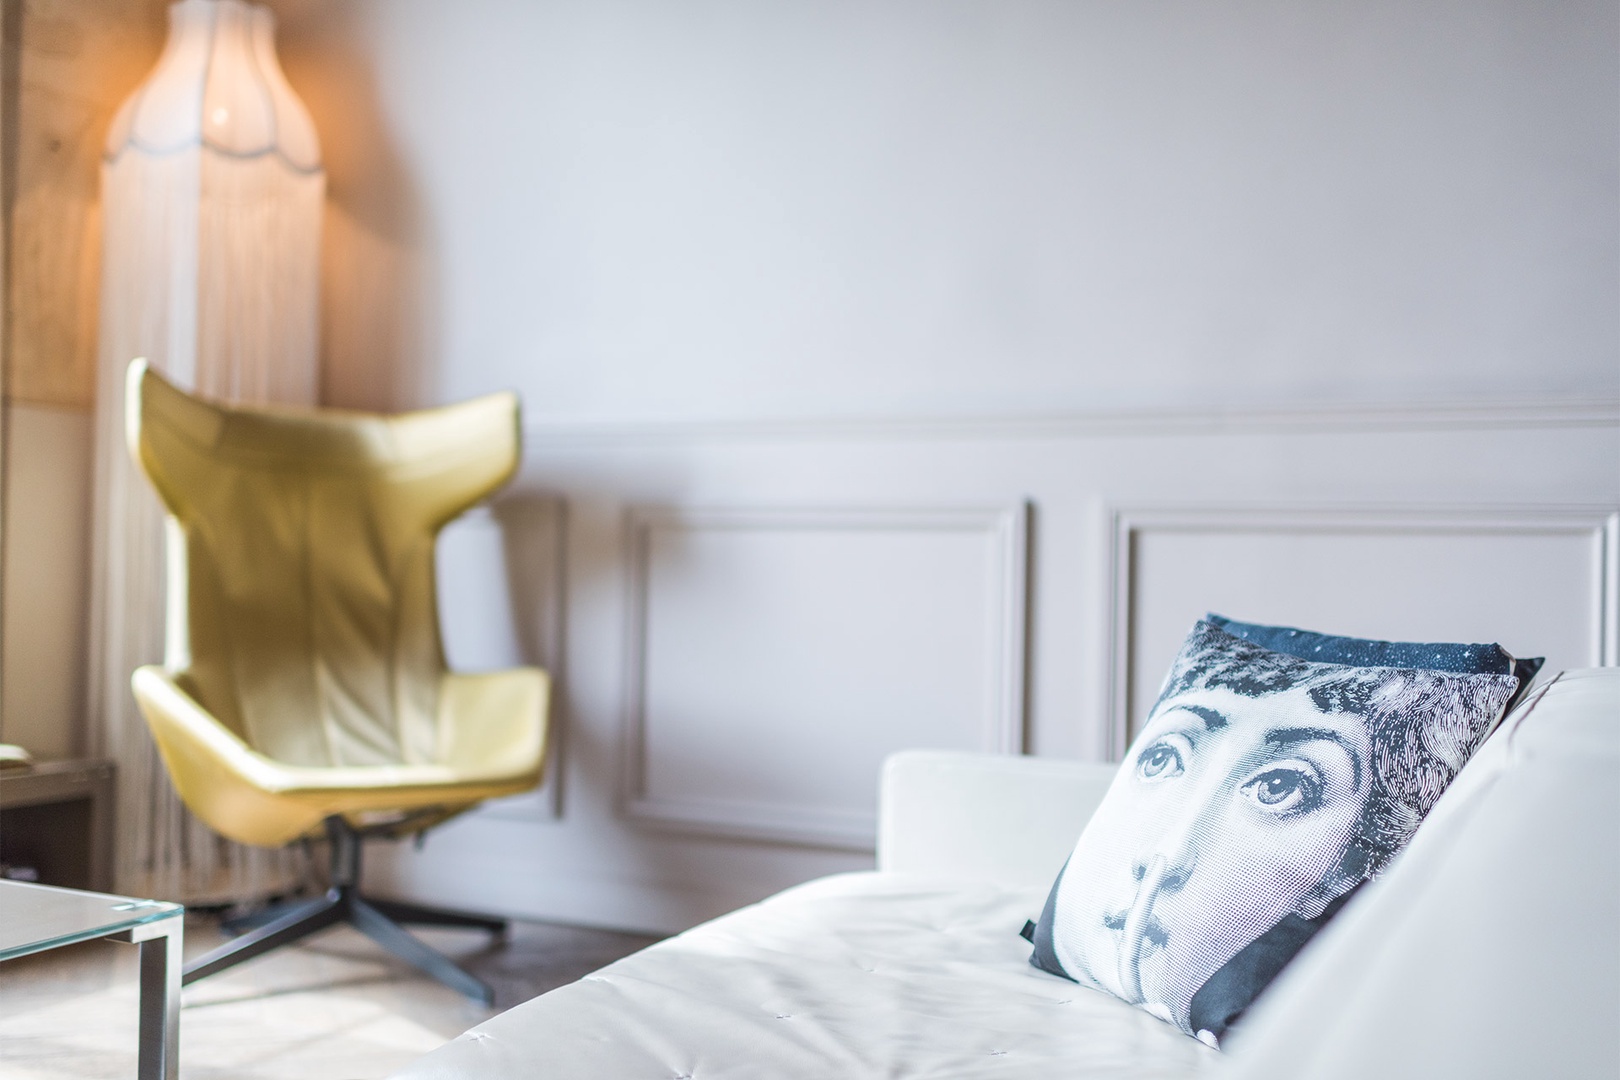 Relax in the stylish Ladoix after a day exploring the city.